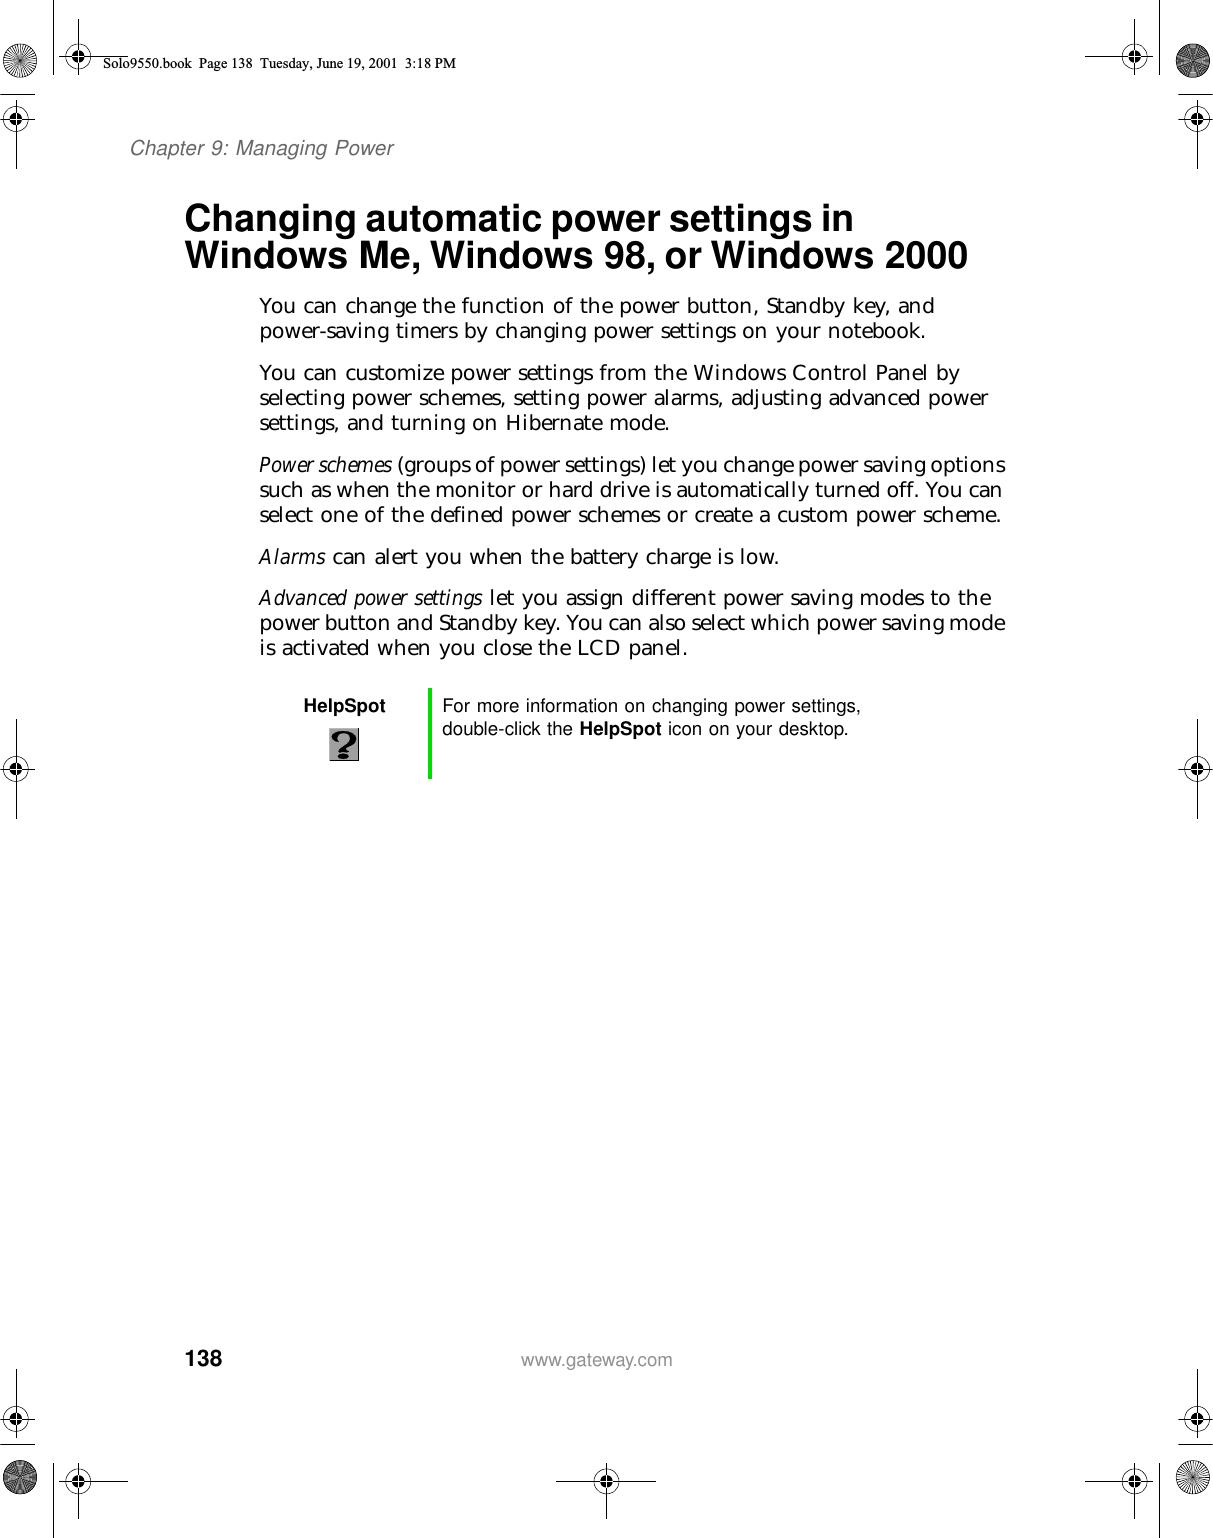 138Chapter 9: Managing Powerwww.gateway.comChanging automatic power settings in Windows Me, Windows 98, or Windows 2000You can change the function of the power button, Standby key, and power-saving timers by changing power settings on your notebook.You can customize power settings from the Windows Control Panel by selecting power schemes, setting power alarms, adjusting advanced power settings, and turning on Hibernate mode.Power schemes (groups of power settings) let you change power saving options such as when the monitor or hard drive is automatically turned off. You can select one of the defined power schemes or create a custom power scheme.Alarms can alert you when the battery charge is low.Advanced power settings let you assign different power saving modes to the power button and Standby key. You can also select which power saving mode is activated when you close the LCD panel.HelpSpot For more information on changing power settings, double-click the HelpSpot icon on your desktop.Solo9550.book Page 138 Tuesday, June 19, 2001 3:18 PM